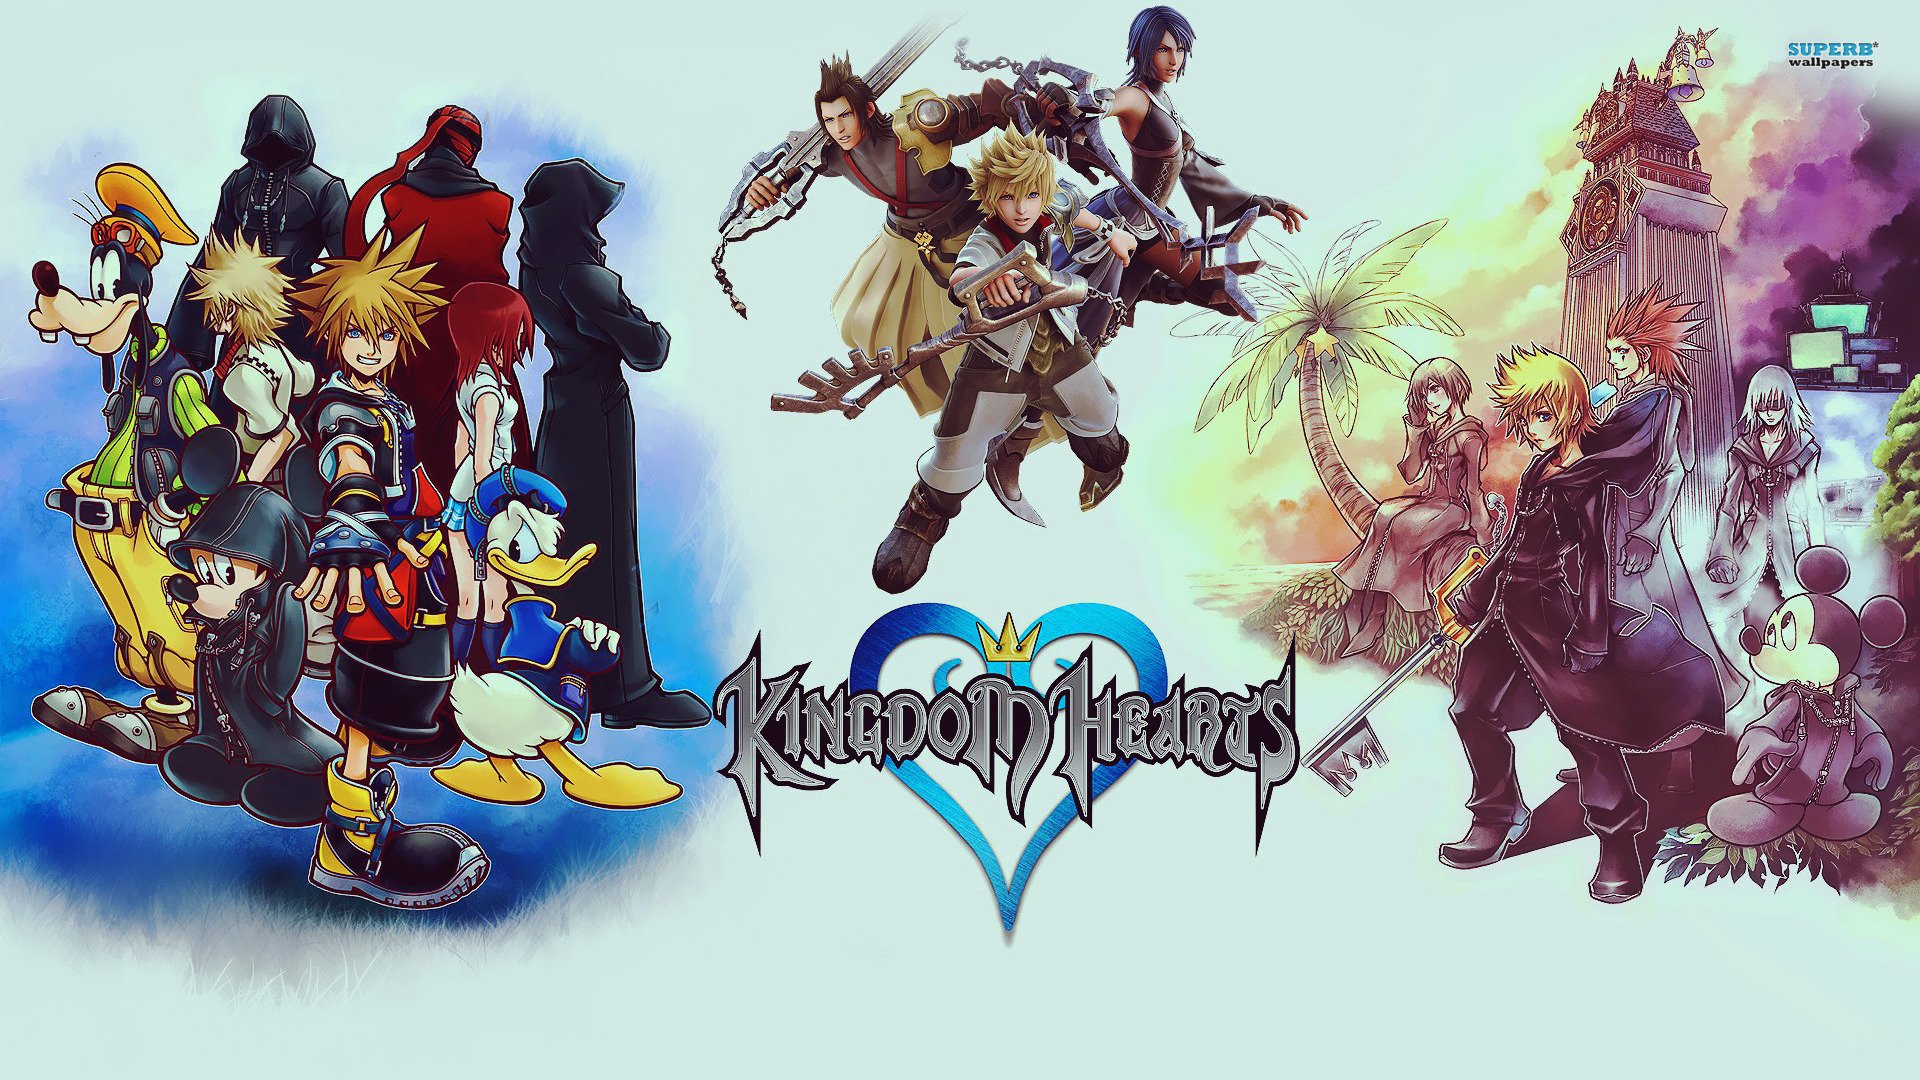 kh wallpaper,graphic design,action adventure game,fictional character,illustration,hero